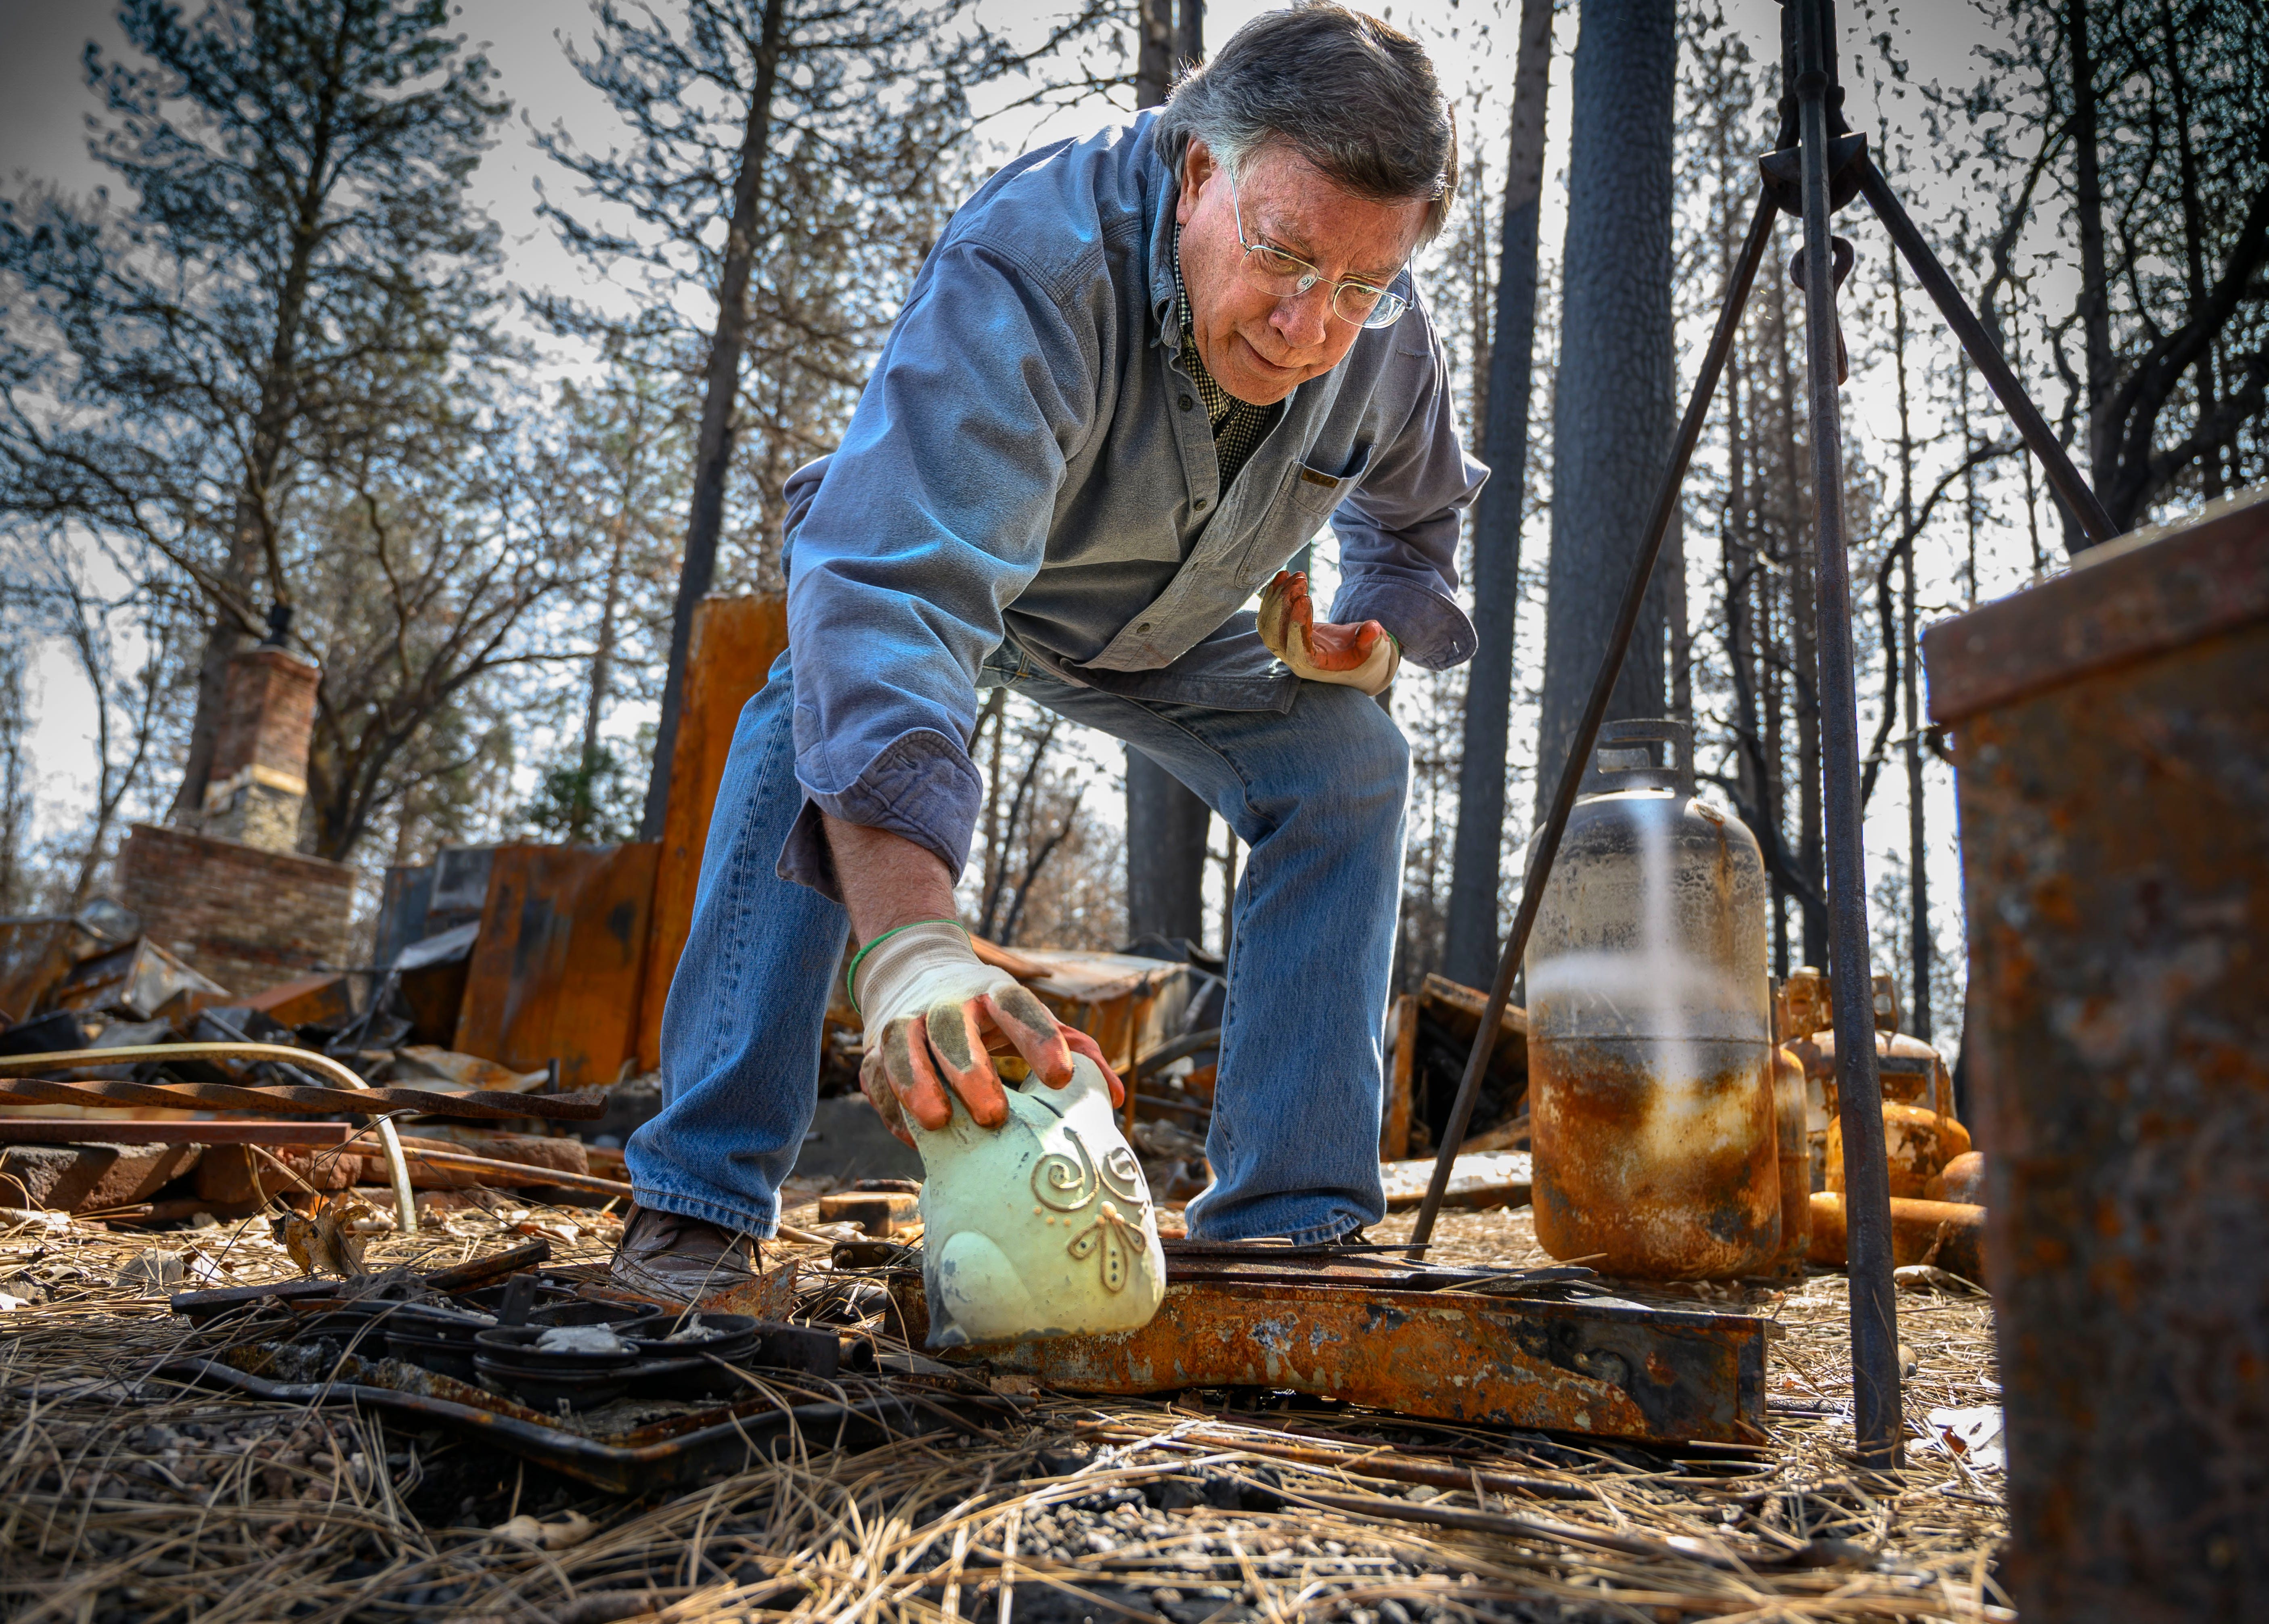 Gene Mapa collects metal and ceramic objects that didn't burn in the Camp Fire at his house in Paradise. Mapa now lives in Colfax, which as a similar level of fire risk.